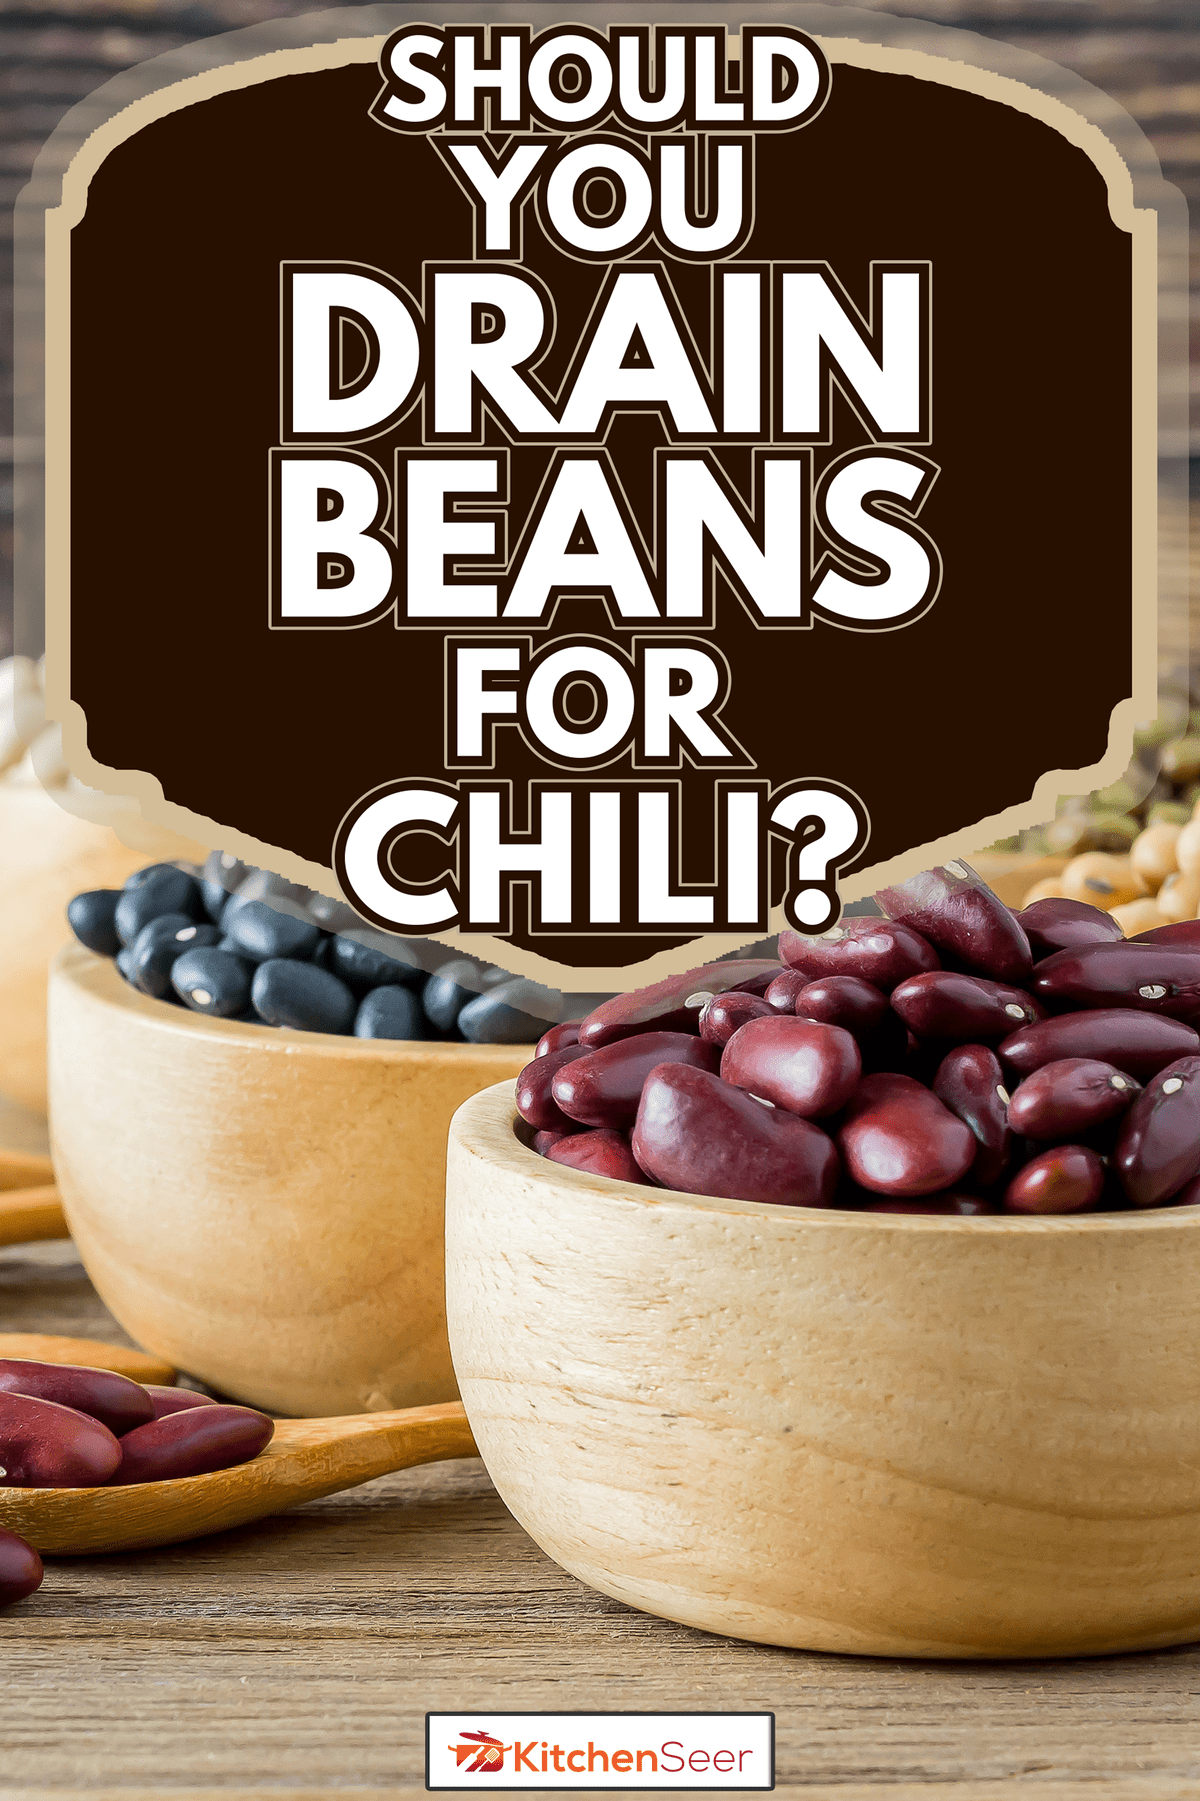 Various grains such as soybeans, black beans, red beans, dried corn in a wooden cup on a wooden table background - Should You Drain Beans For Chili